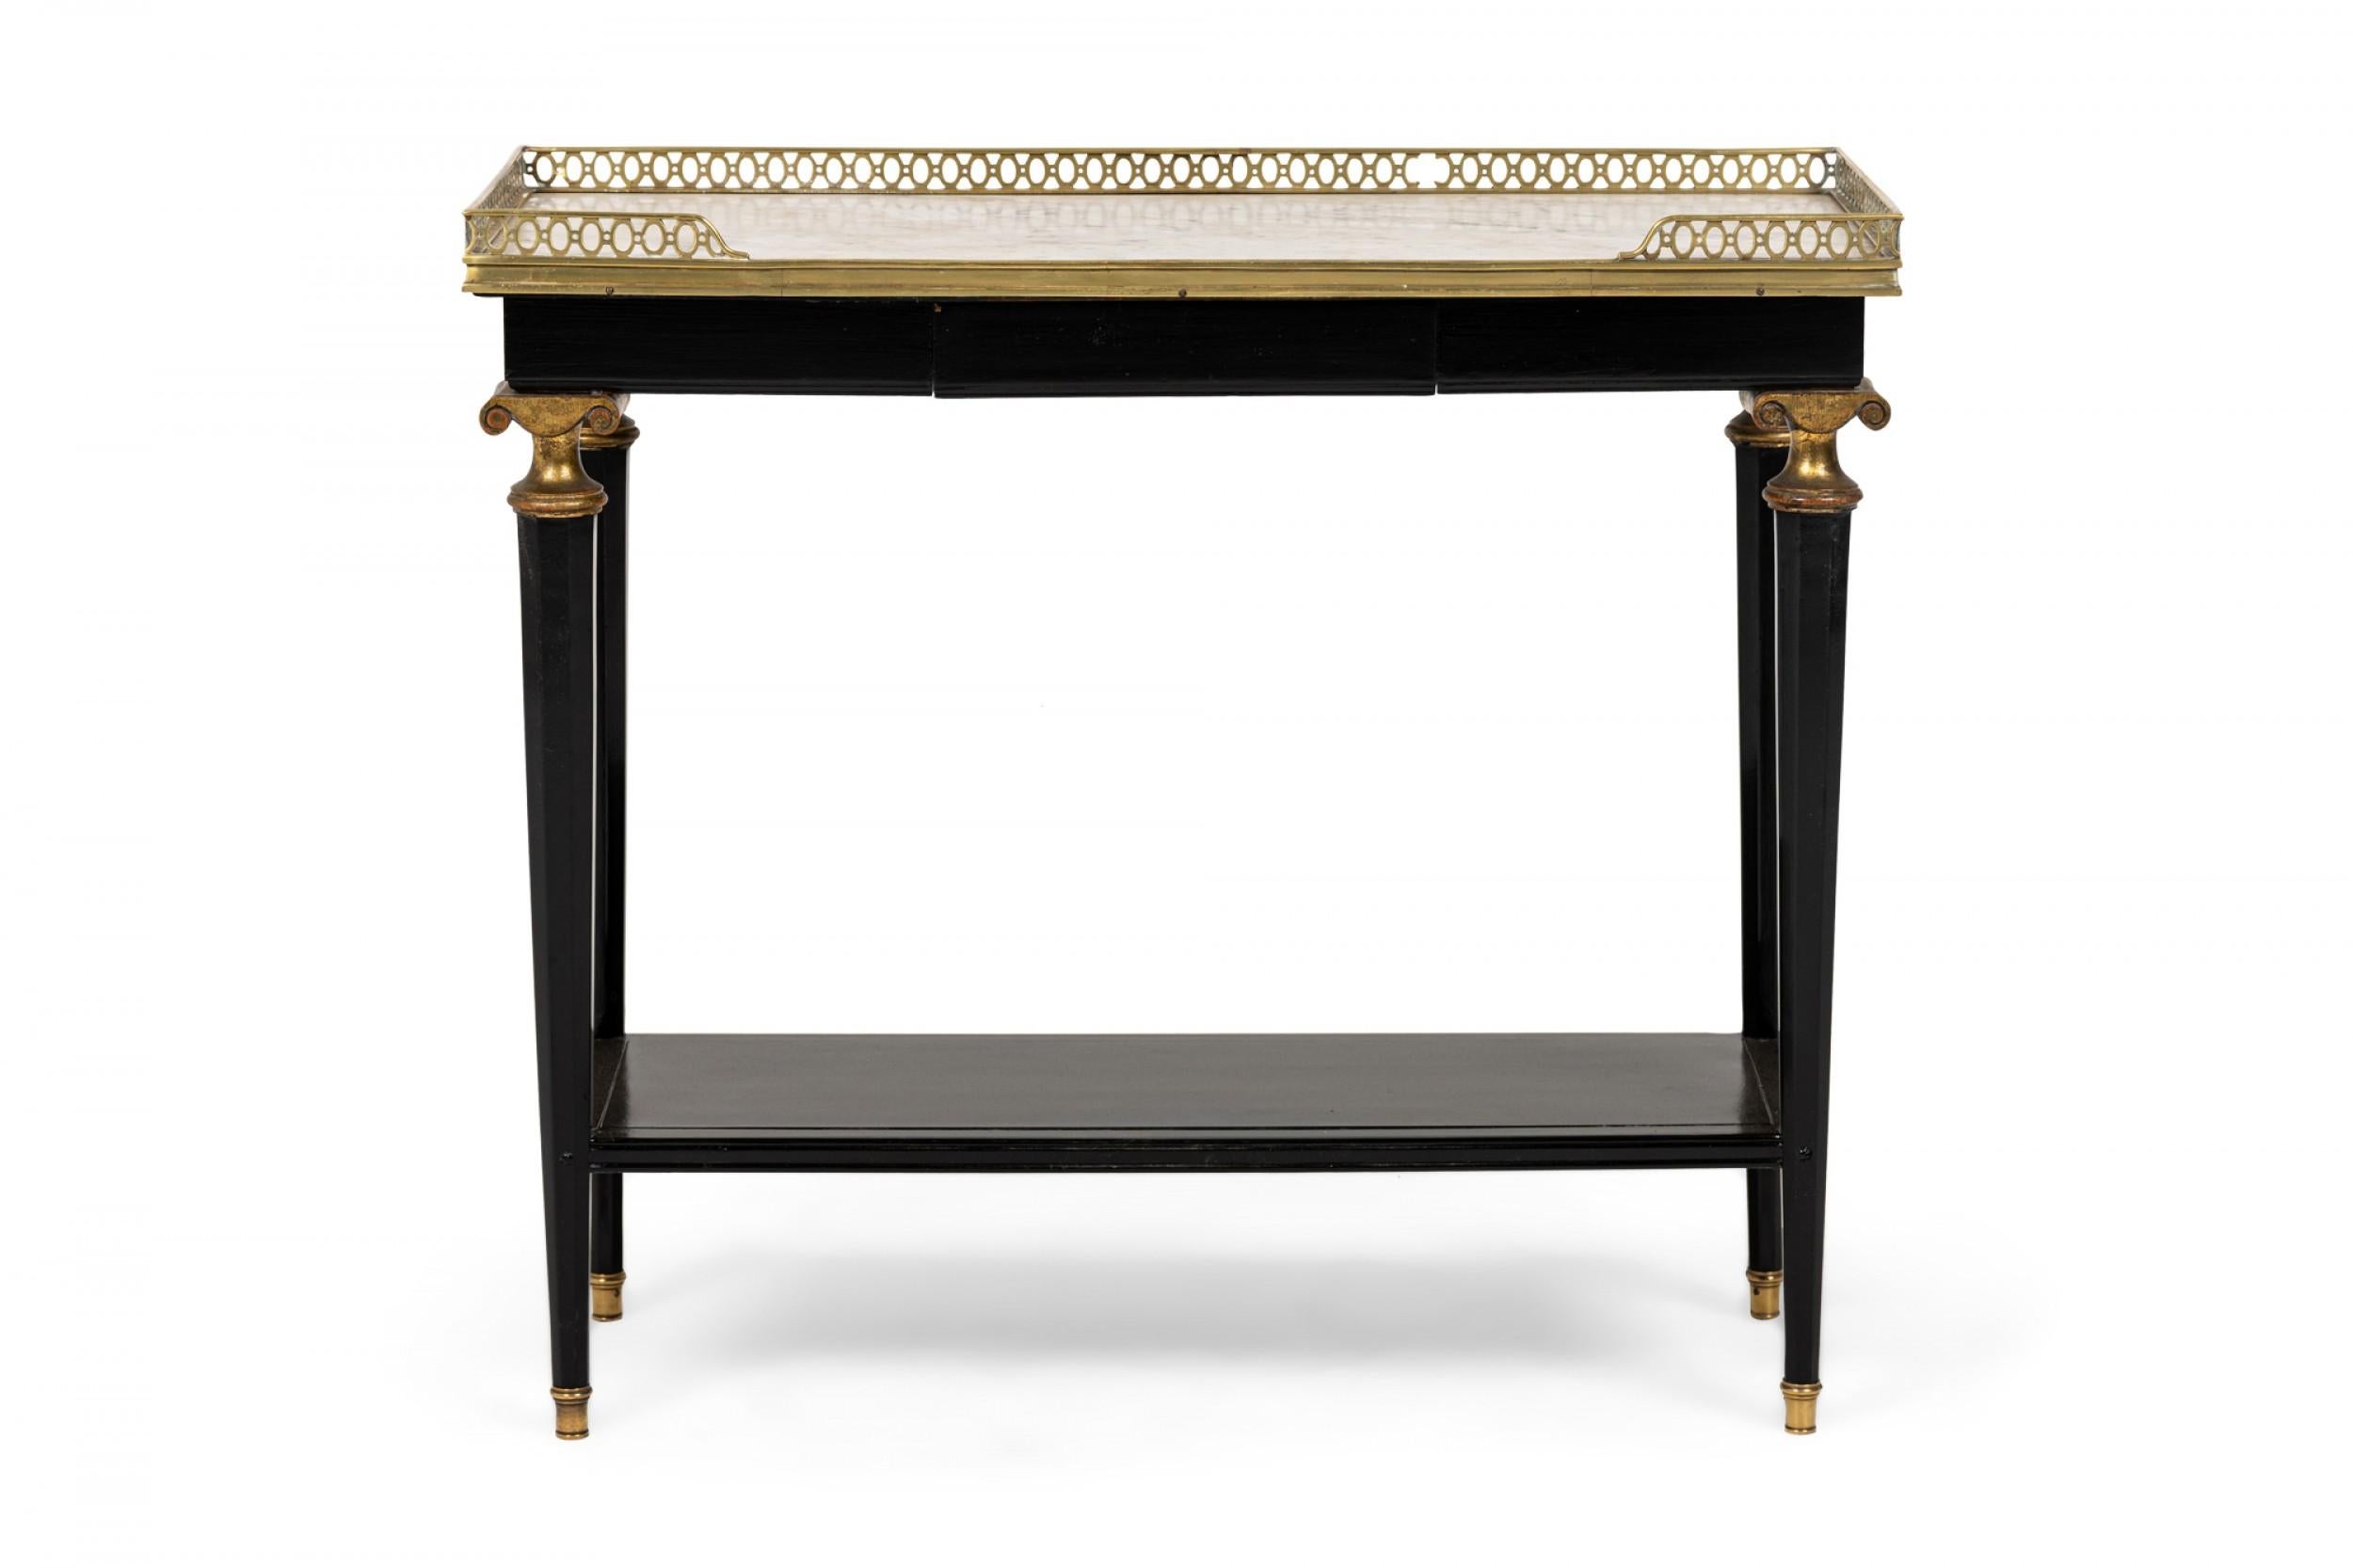 Pair of French mid-century (circa 1950) rectangular ebonized end / side tables with brass scroll capital design mounts under white marble tops surrounded with a filigree gallery, and a lower stretcher shelf connecting four tapered and faceted legs